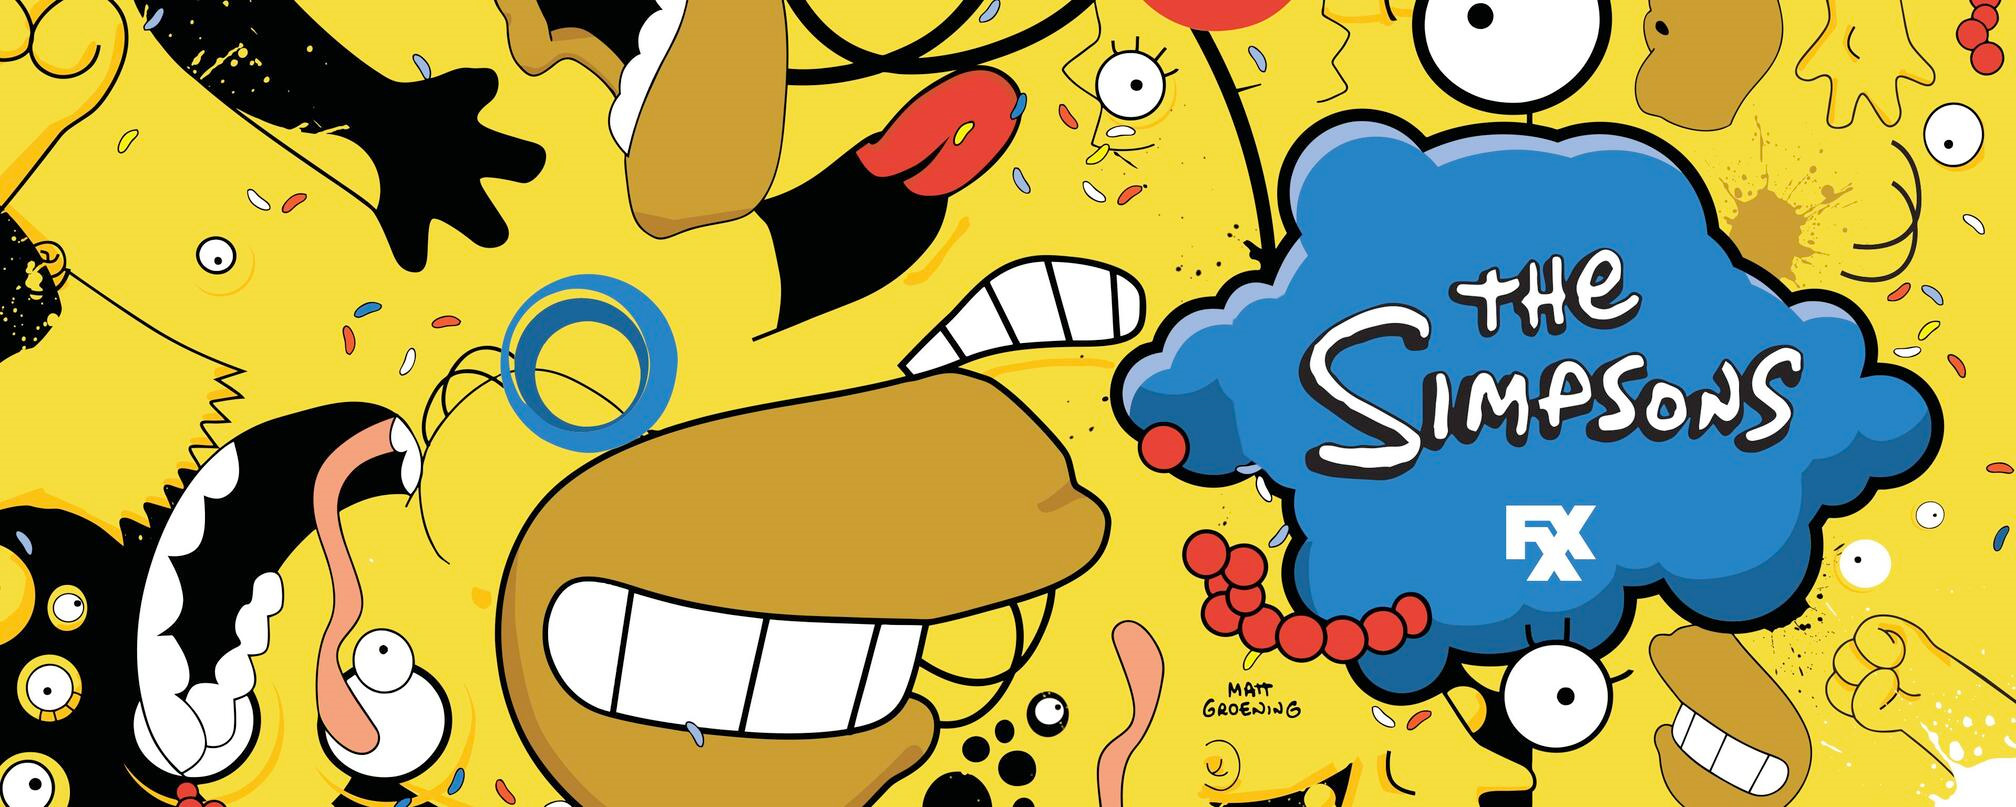 The promotional poster for FXX's marathon of The Simpsons